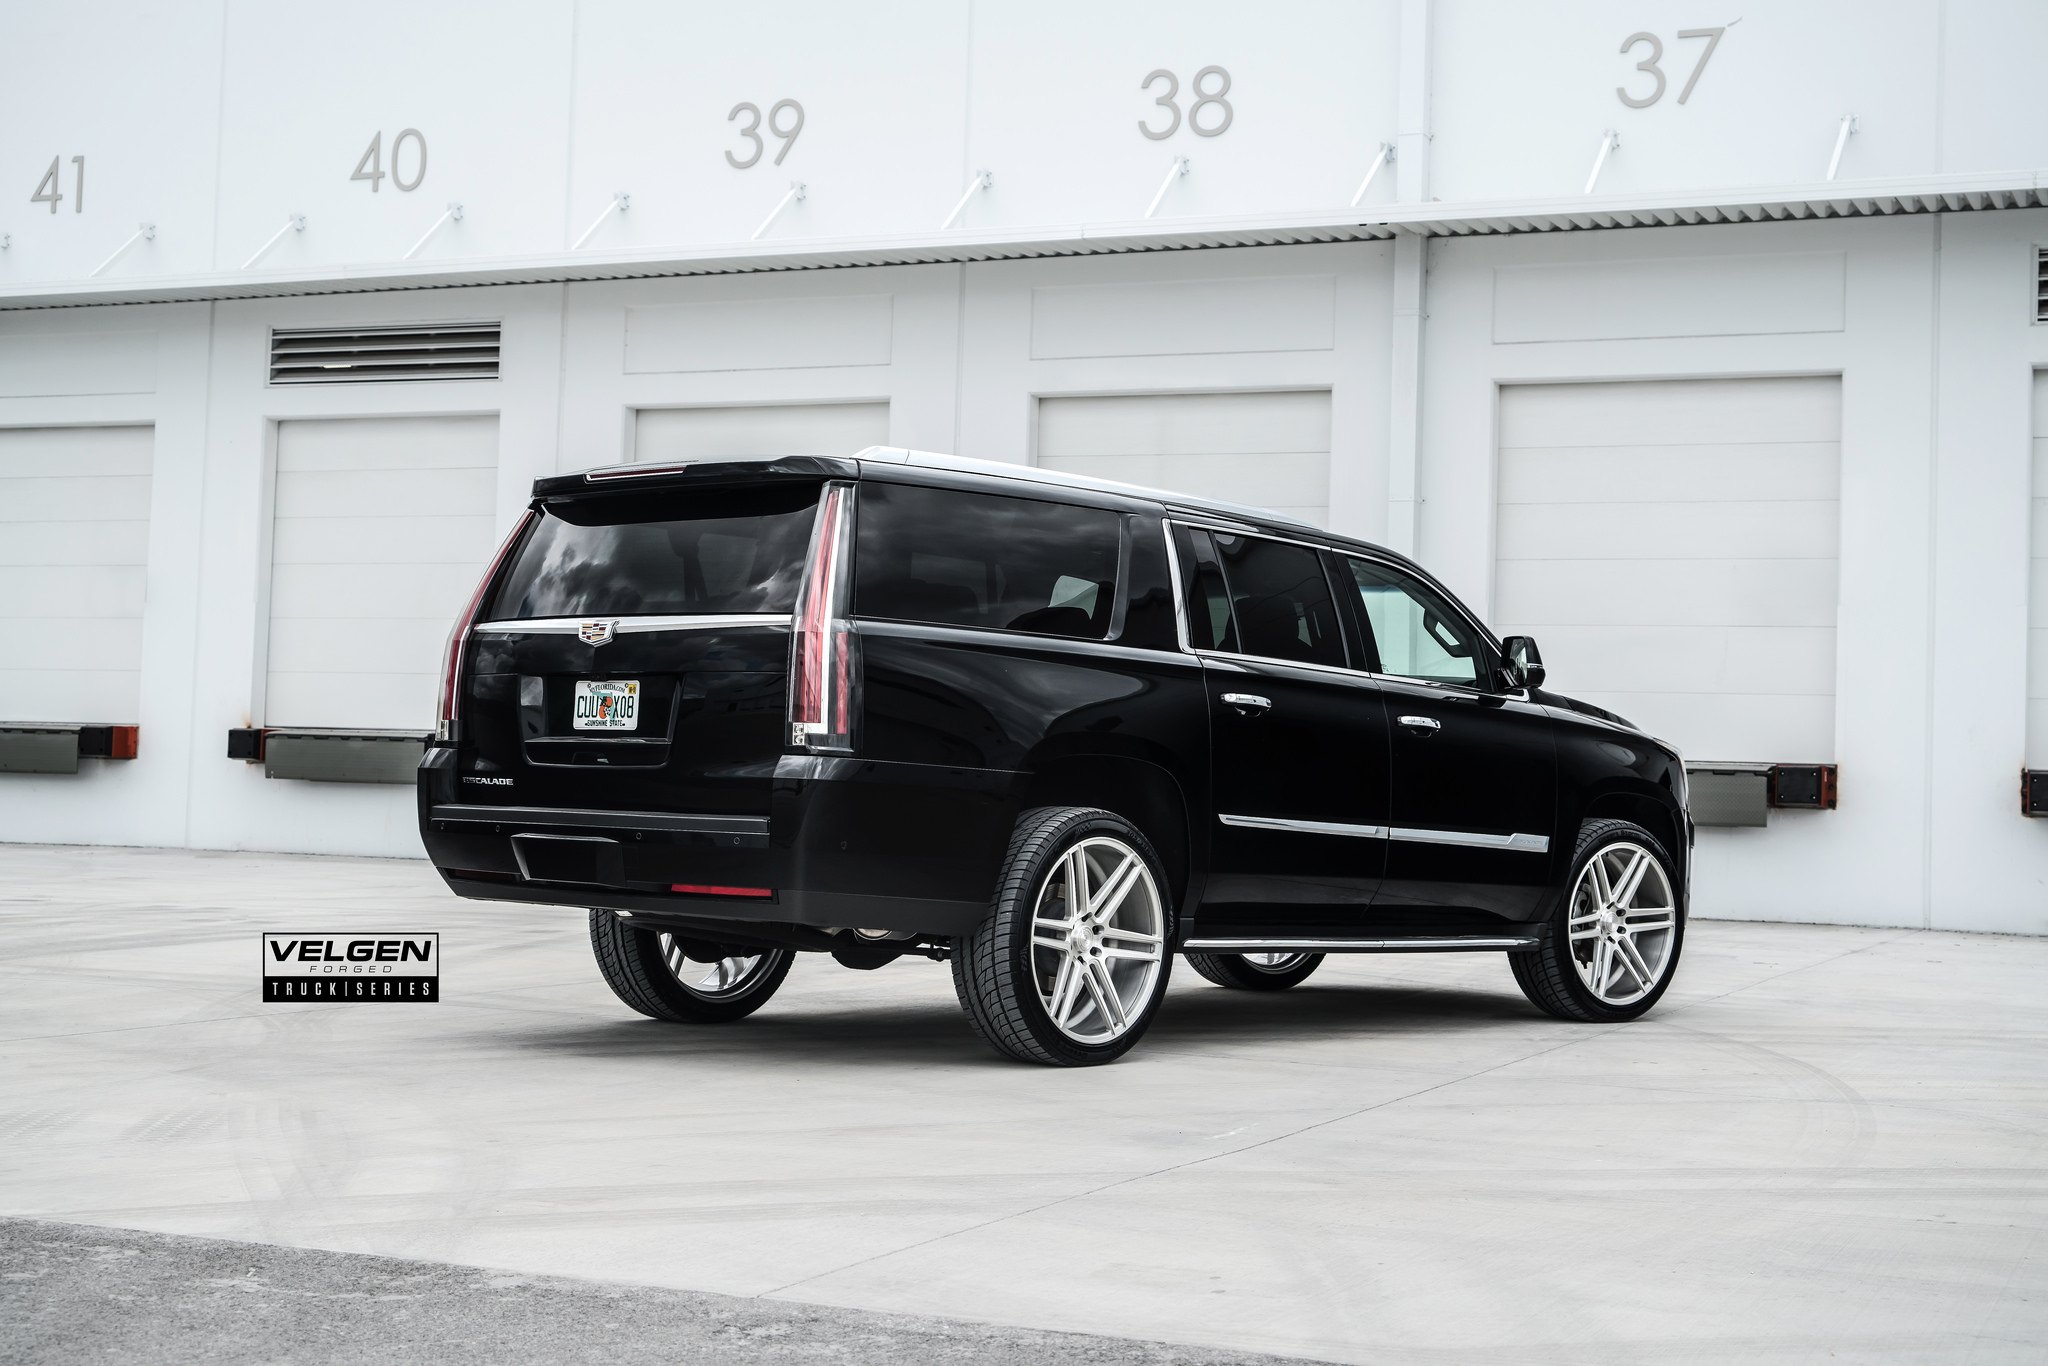 Black Cadillac Escalade with Red LED Taillights - Photo by Velgen